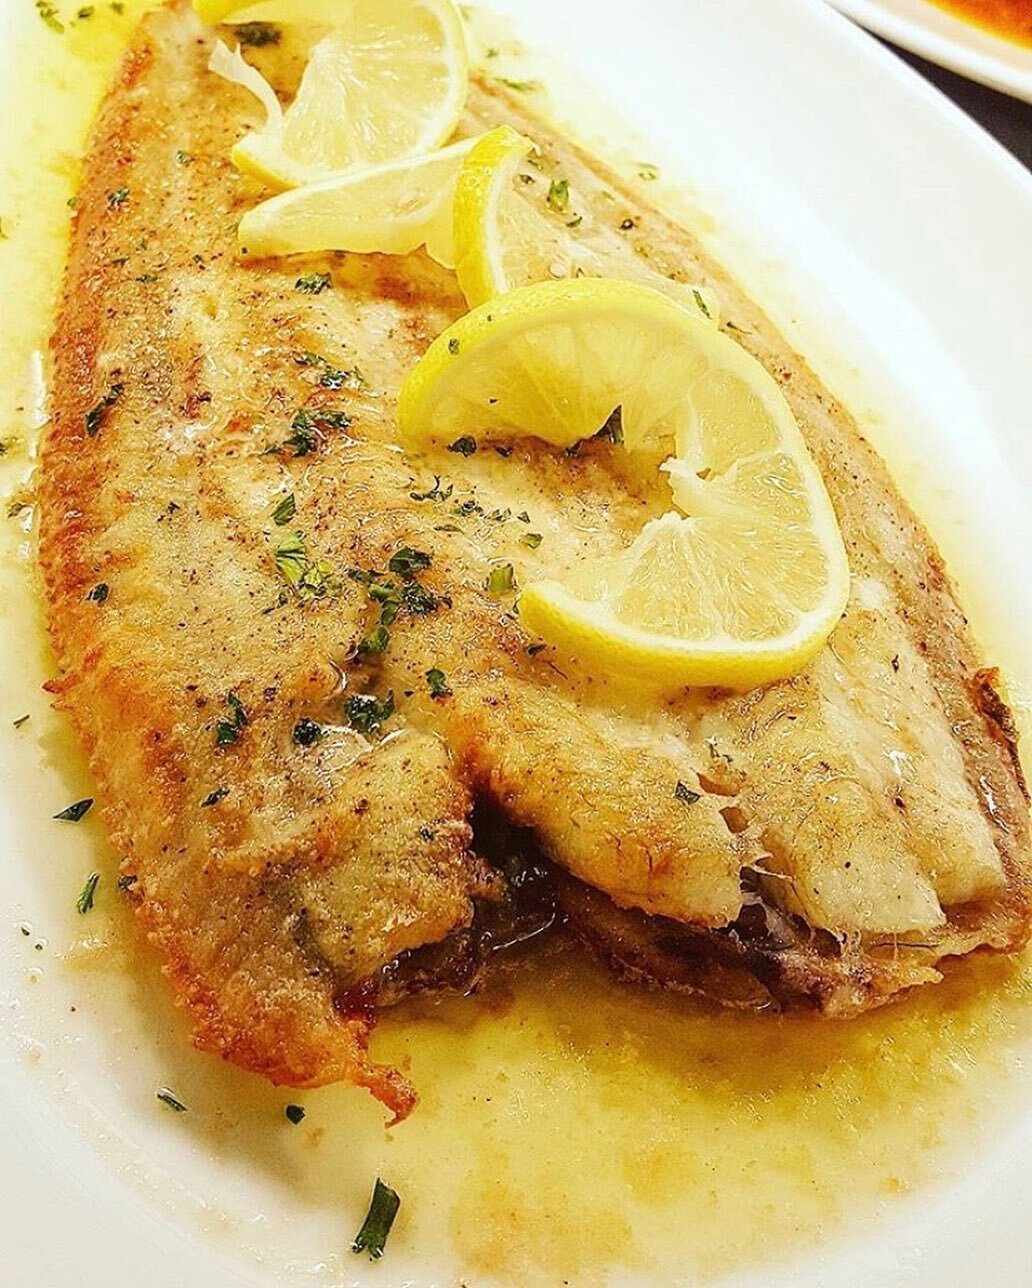 Enjoy some European Dover Sole. Be sure to make your reservations, season is here Sarasota!